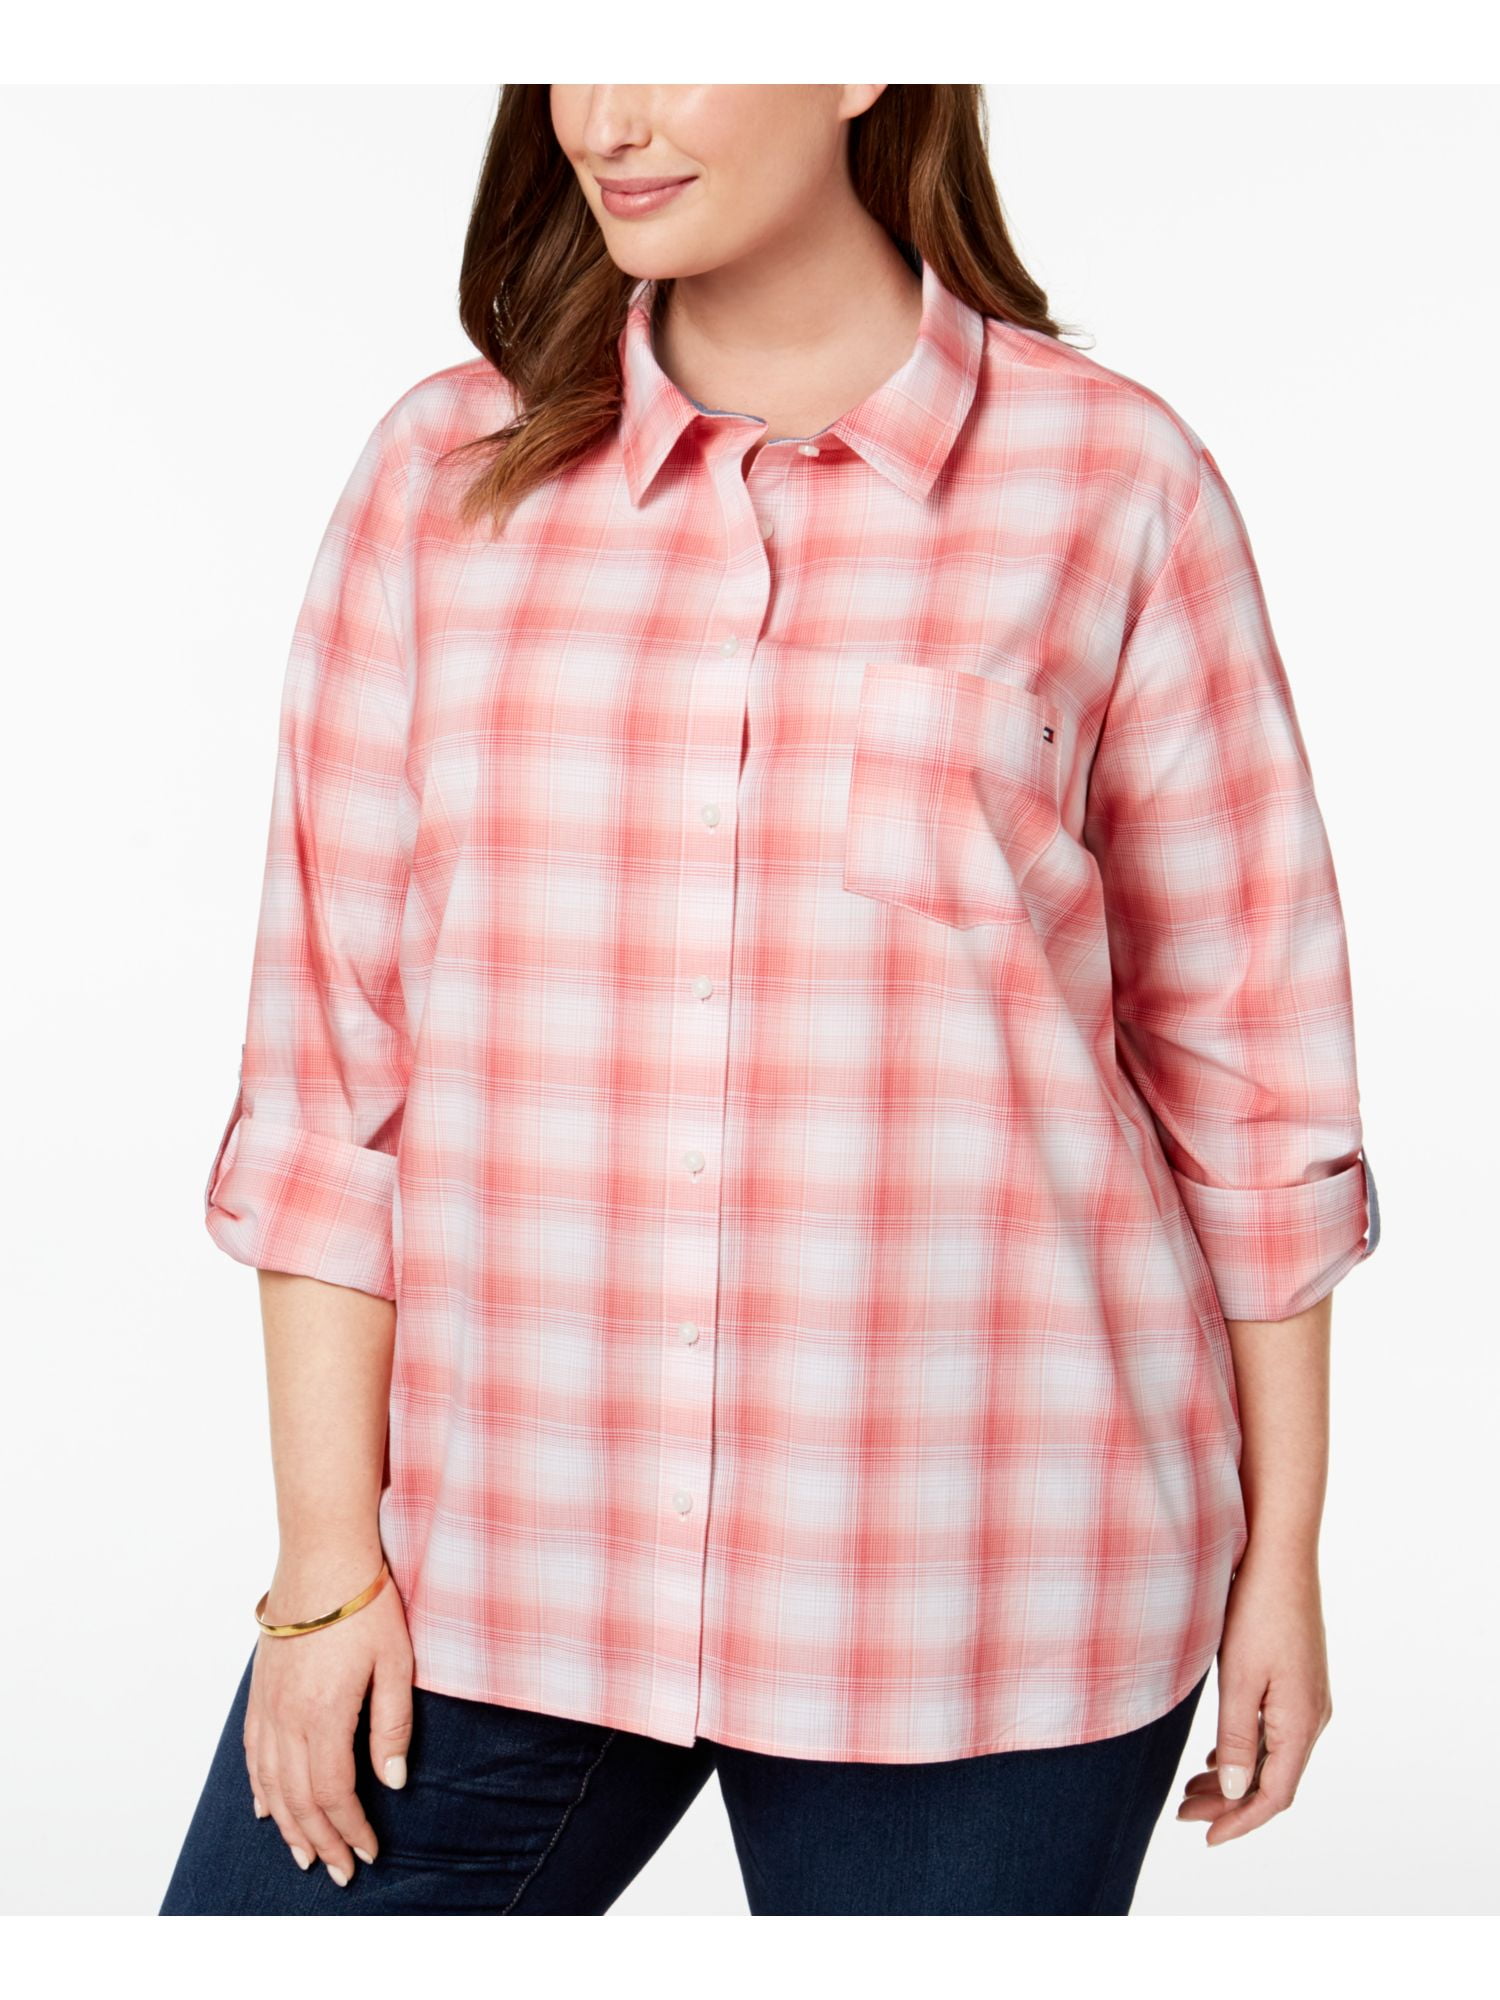 TOMMY HILFIGER Womens Pink Plaid Up Plus Size: Top 1X Collared Button Cuffed